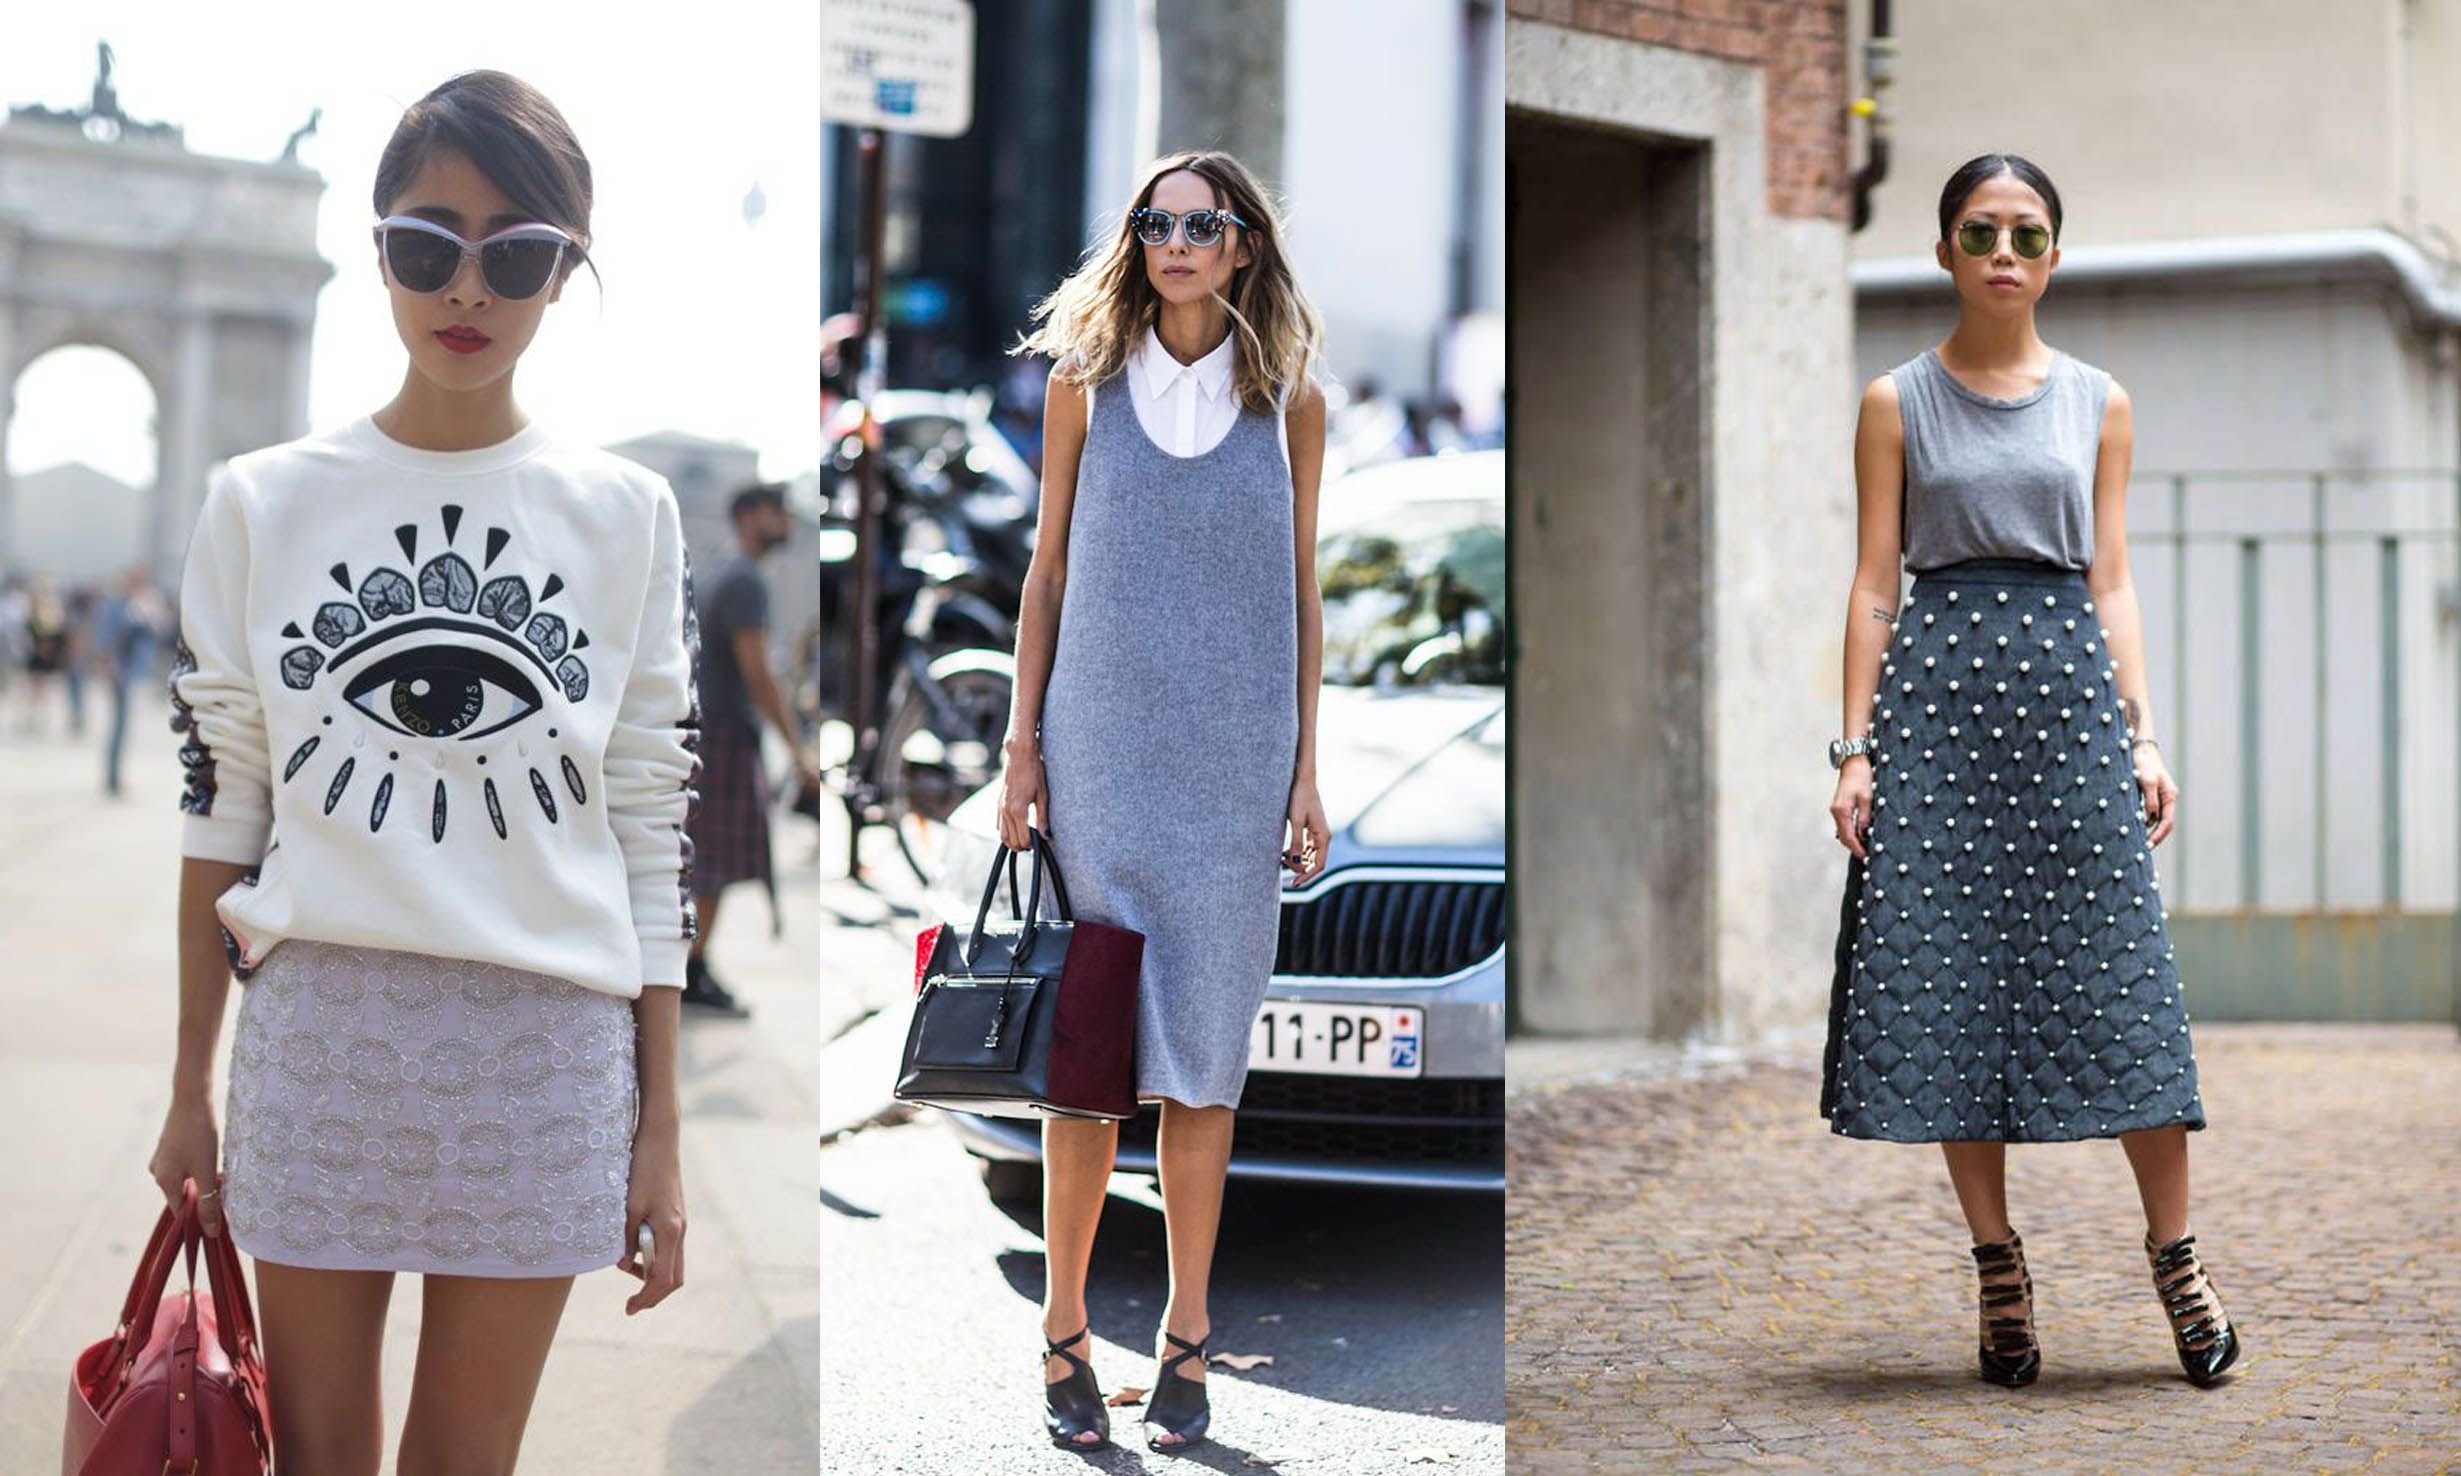 5 Reasons Why Knitwear Can Be Your Best Friend This Rainy Season